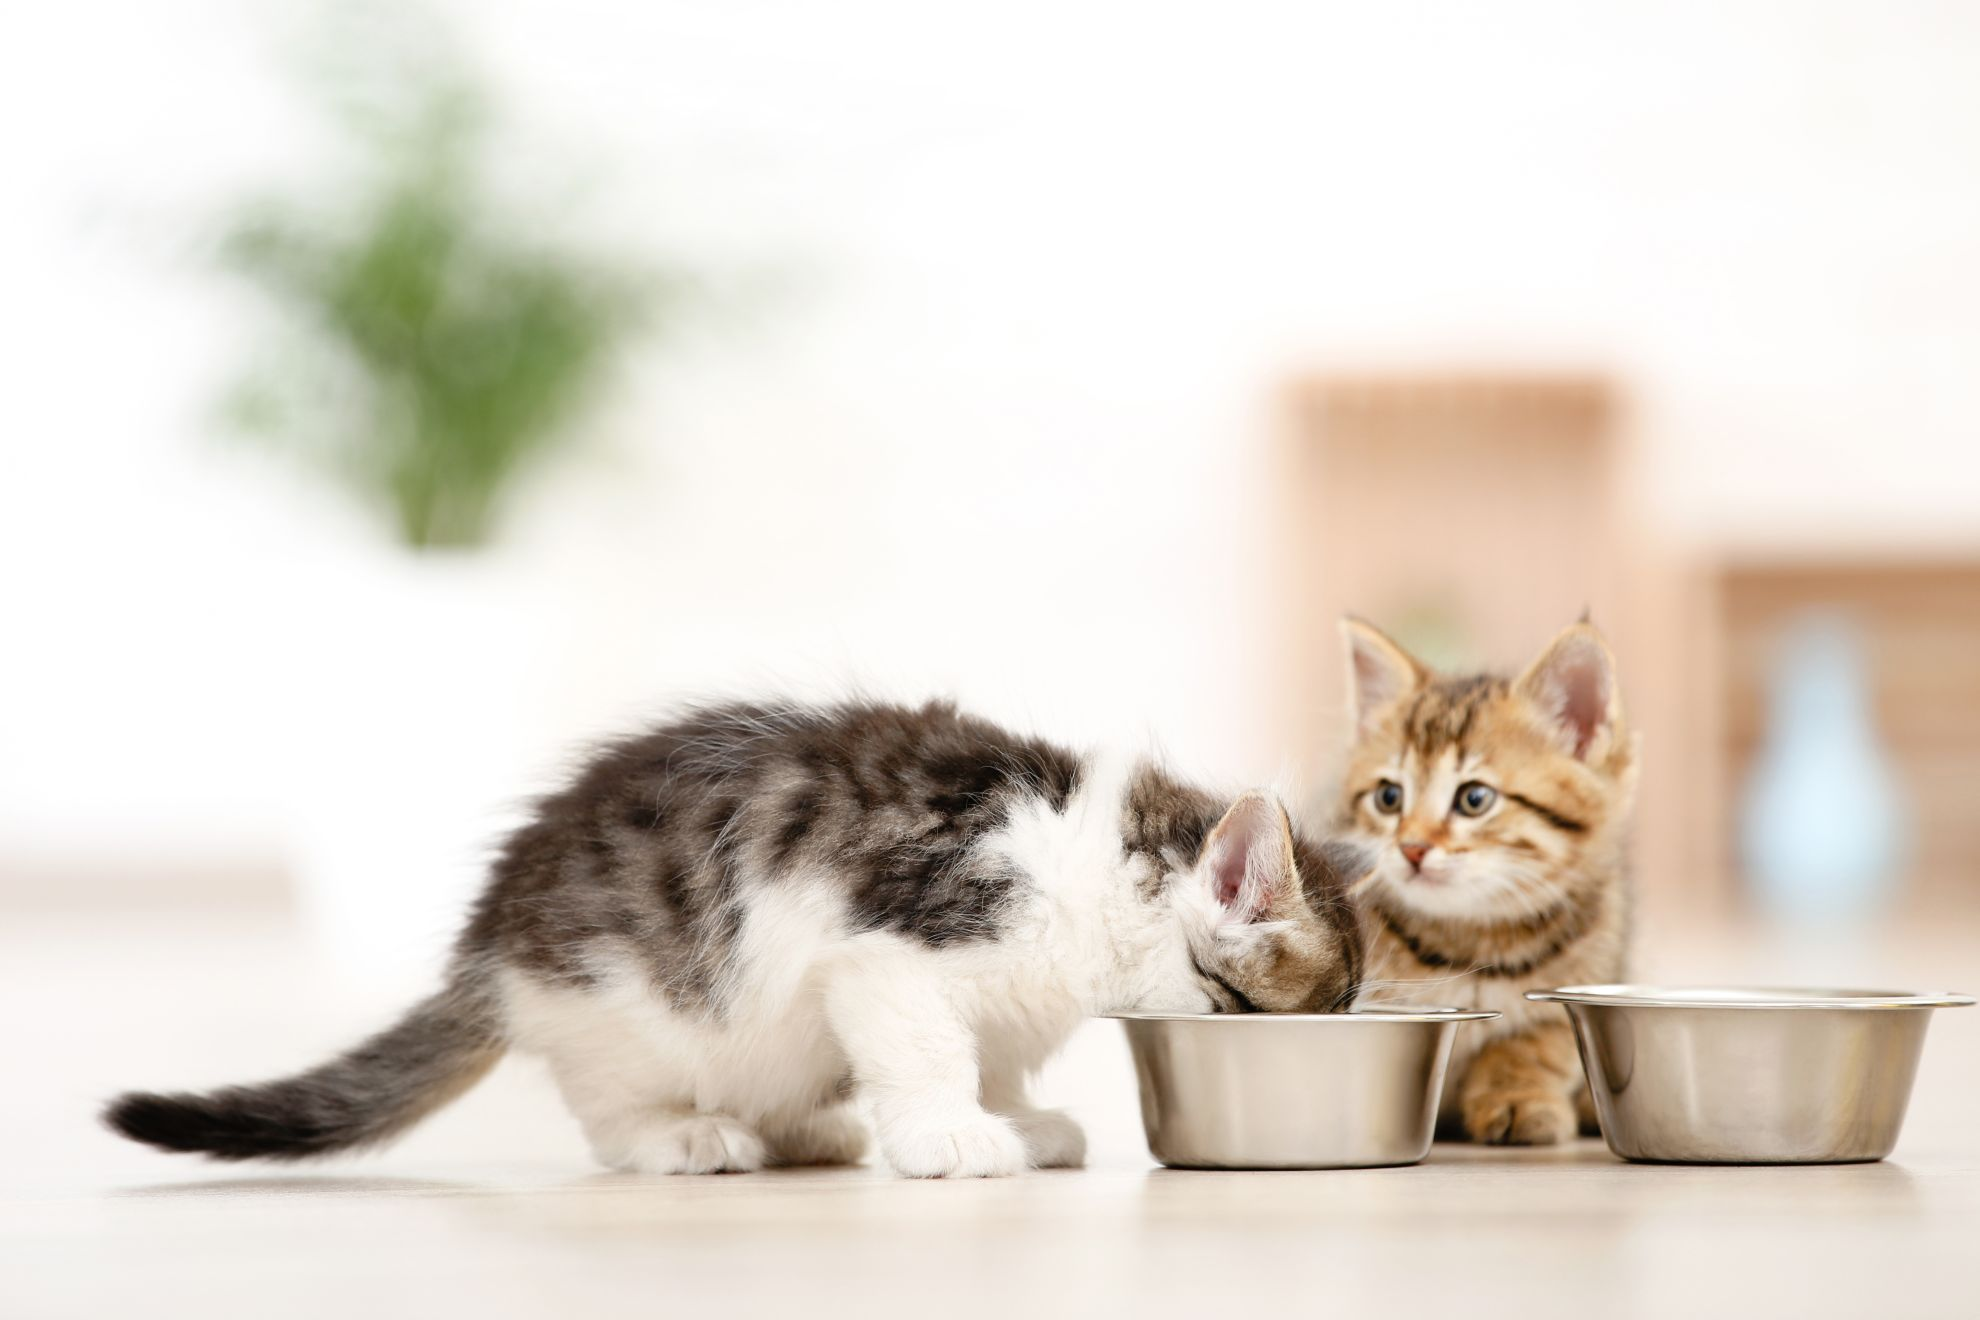 Kittens eating from a food bowl on the floor